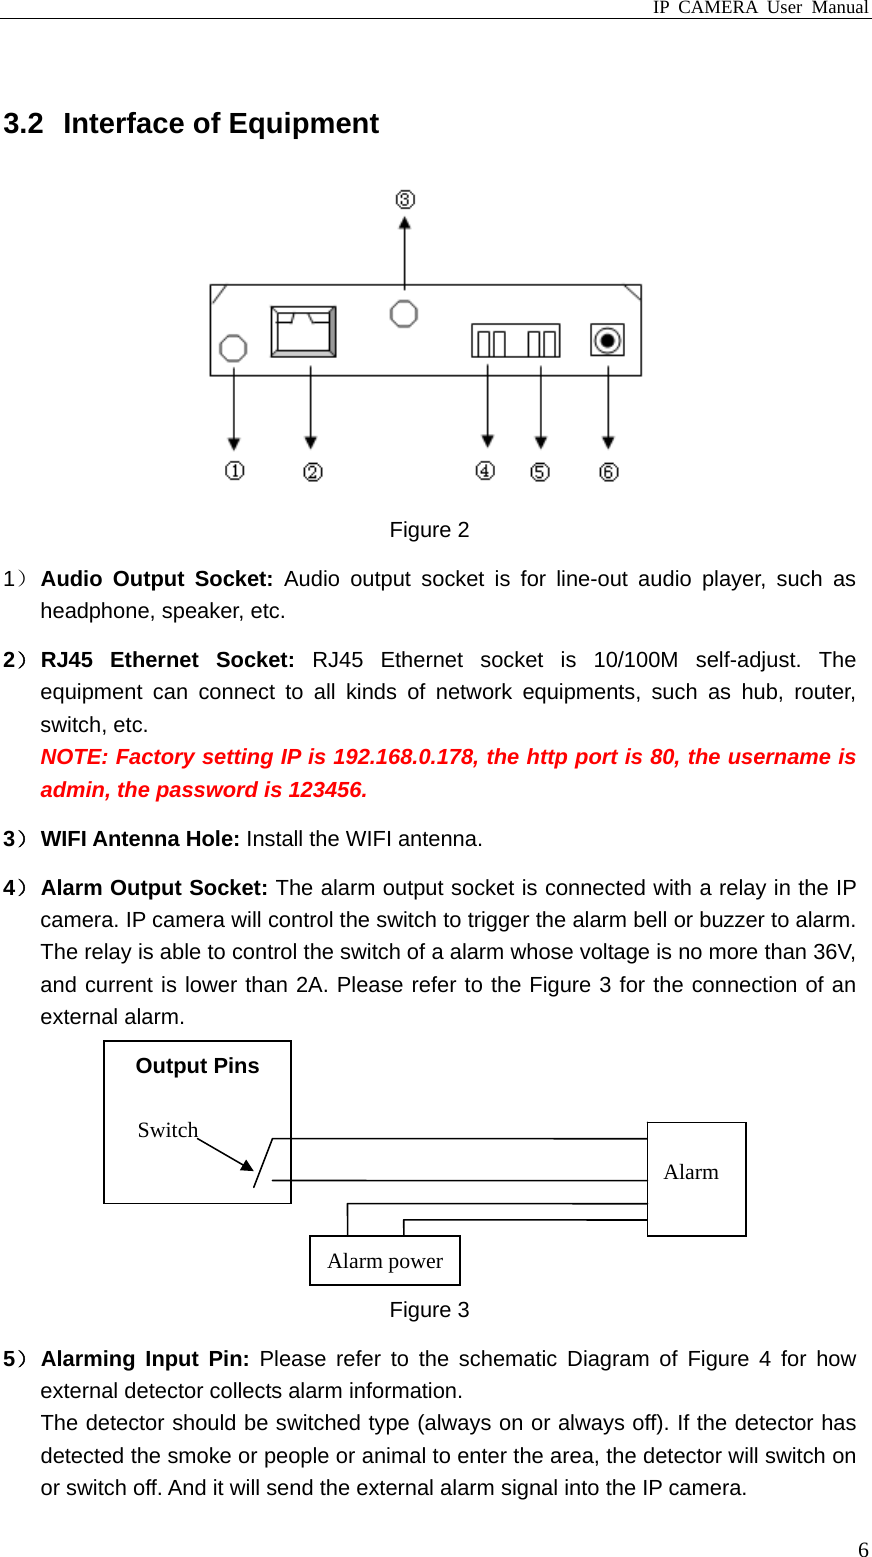 IP CAMERA User Manual  6 3.2  Interface of Equipment  Figure 2 1） Audio Output Socket: Audio output socket is for line-out audio player, such as headphone, speaker, etc. 2） RJ45 Ethernet Socket: RJ45 Ethernet socket is 10/100M self-adjust. The equipment can connect to all kinds of network equipments, such as hub, router, switch, etc. NOTE: Factory setting IP is 192.168.0.178, the http port is 80, the username is admin, the password is 123456. 3） WIFI Antenna Hole: Install the WIFI antenna. 4） Alarm Output Socket: The alarm output socket is connected with a relay in the IP camera. IP camera will control the switch to trigger the alarm bell or buzzer to alarm. The relay is able to control the switch of a alarm whose voltage is no more than 36V, and current is lower than 2A. Please refer to the Figure 3 for the connection of an external alarm.  Figure 3 5） Alarming Input Pin: Please refer to the schematic Diagram of Figure 4 for how external detector collects alarm information. The detector should be switched type (always on or always off). If the detector has detected the smoke or people or animal to enter the area, the detector will switch on or switch off. And it will send the external alarm signal into the IP camera. Output Pins Alarm powerAlarm Switch